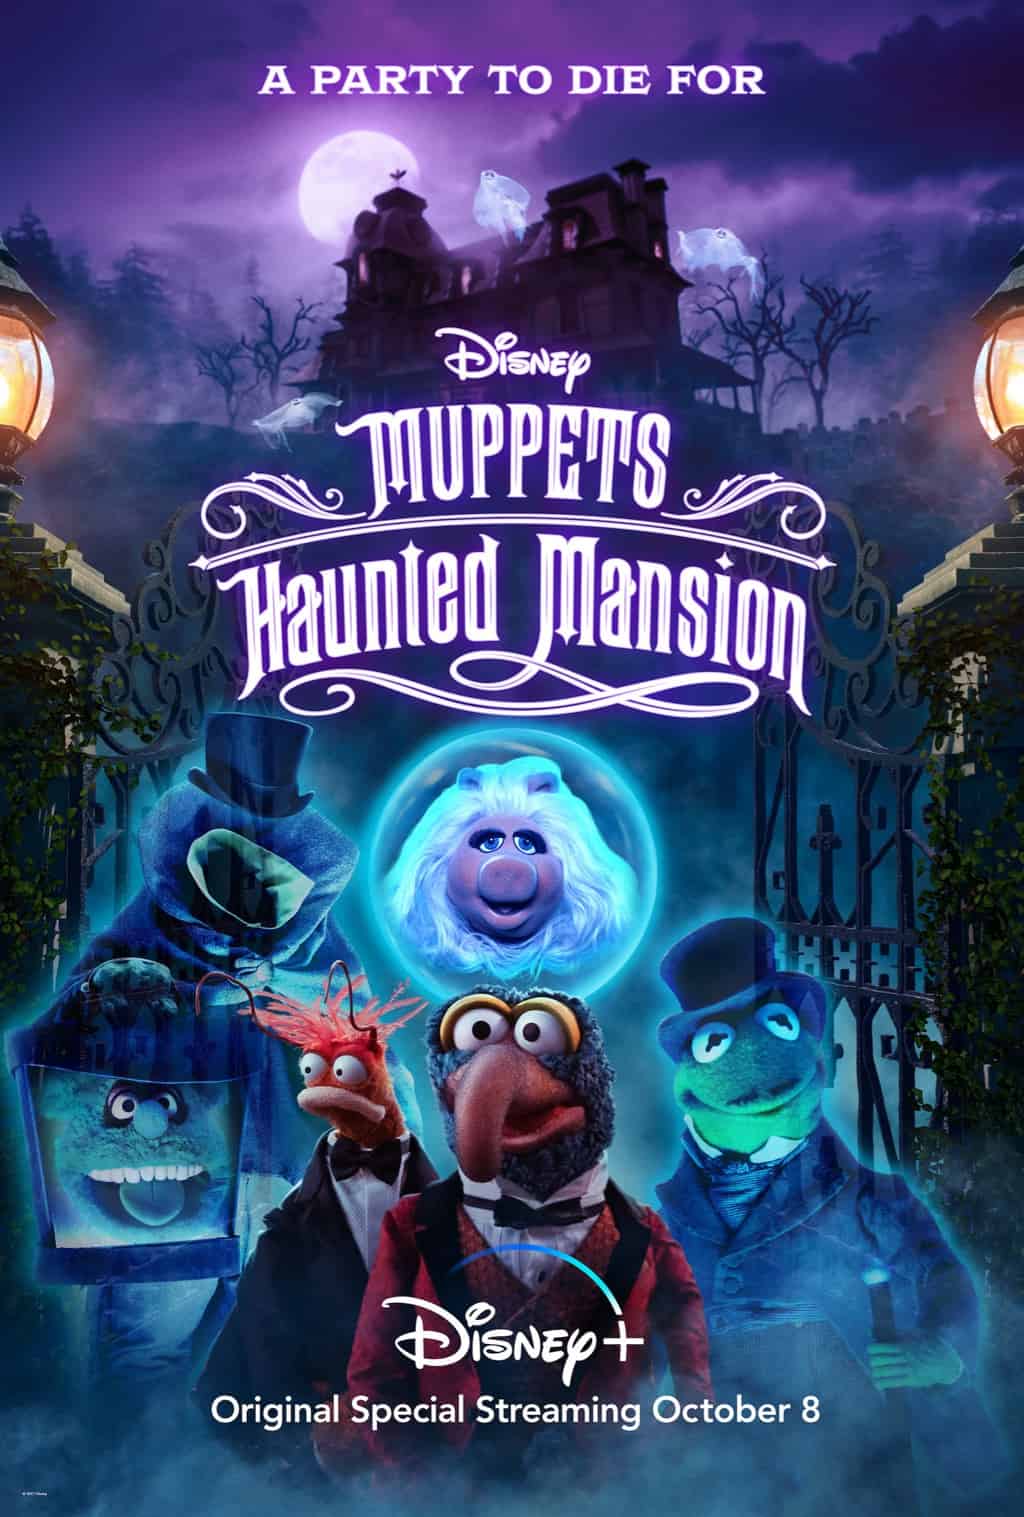 is muppets haunted mansion too scary for kids parent movie review